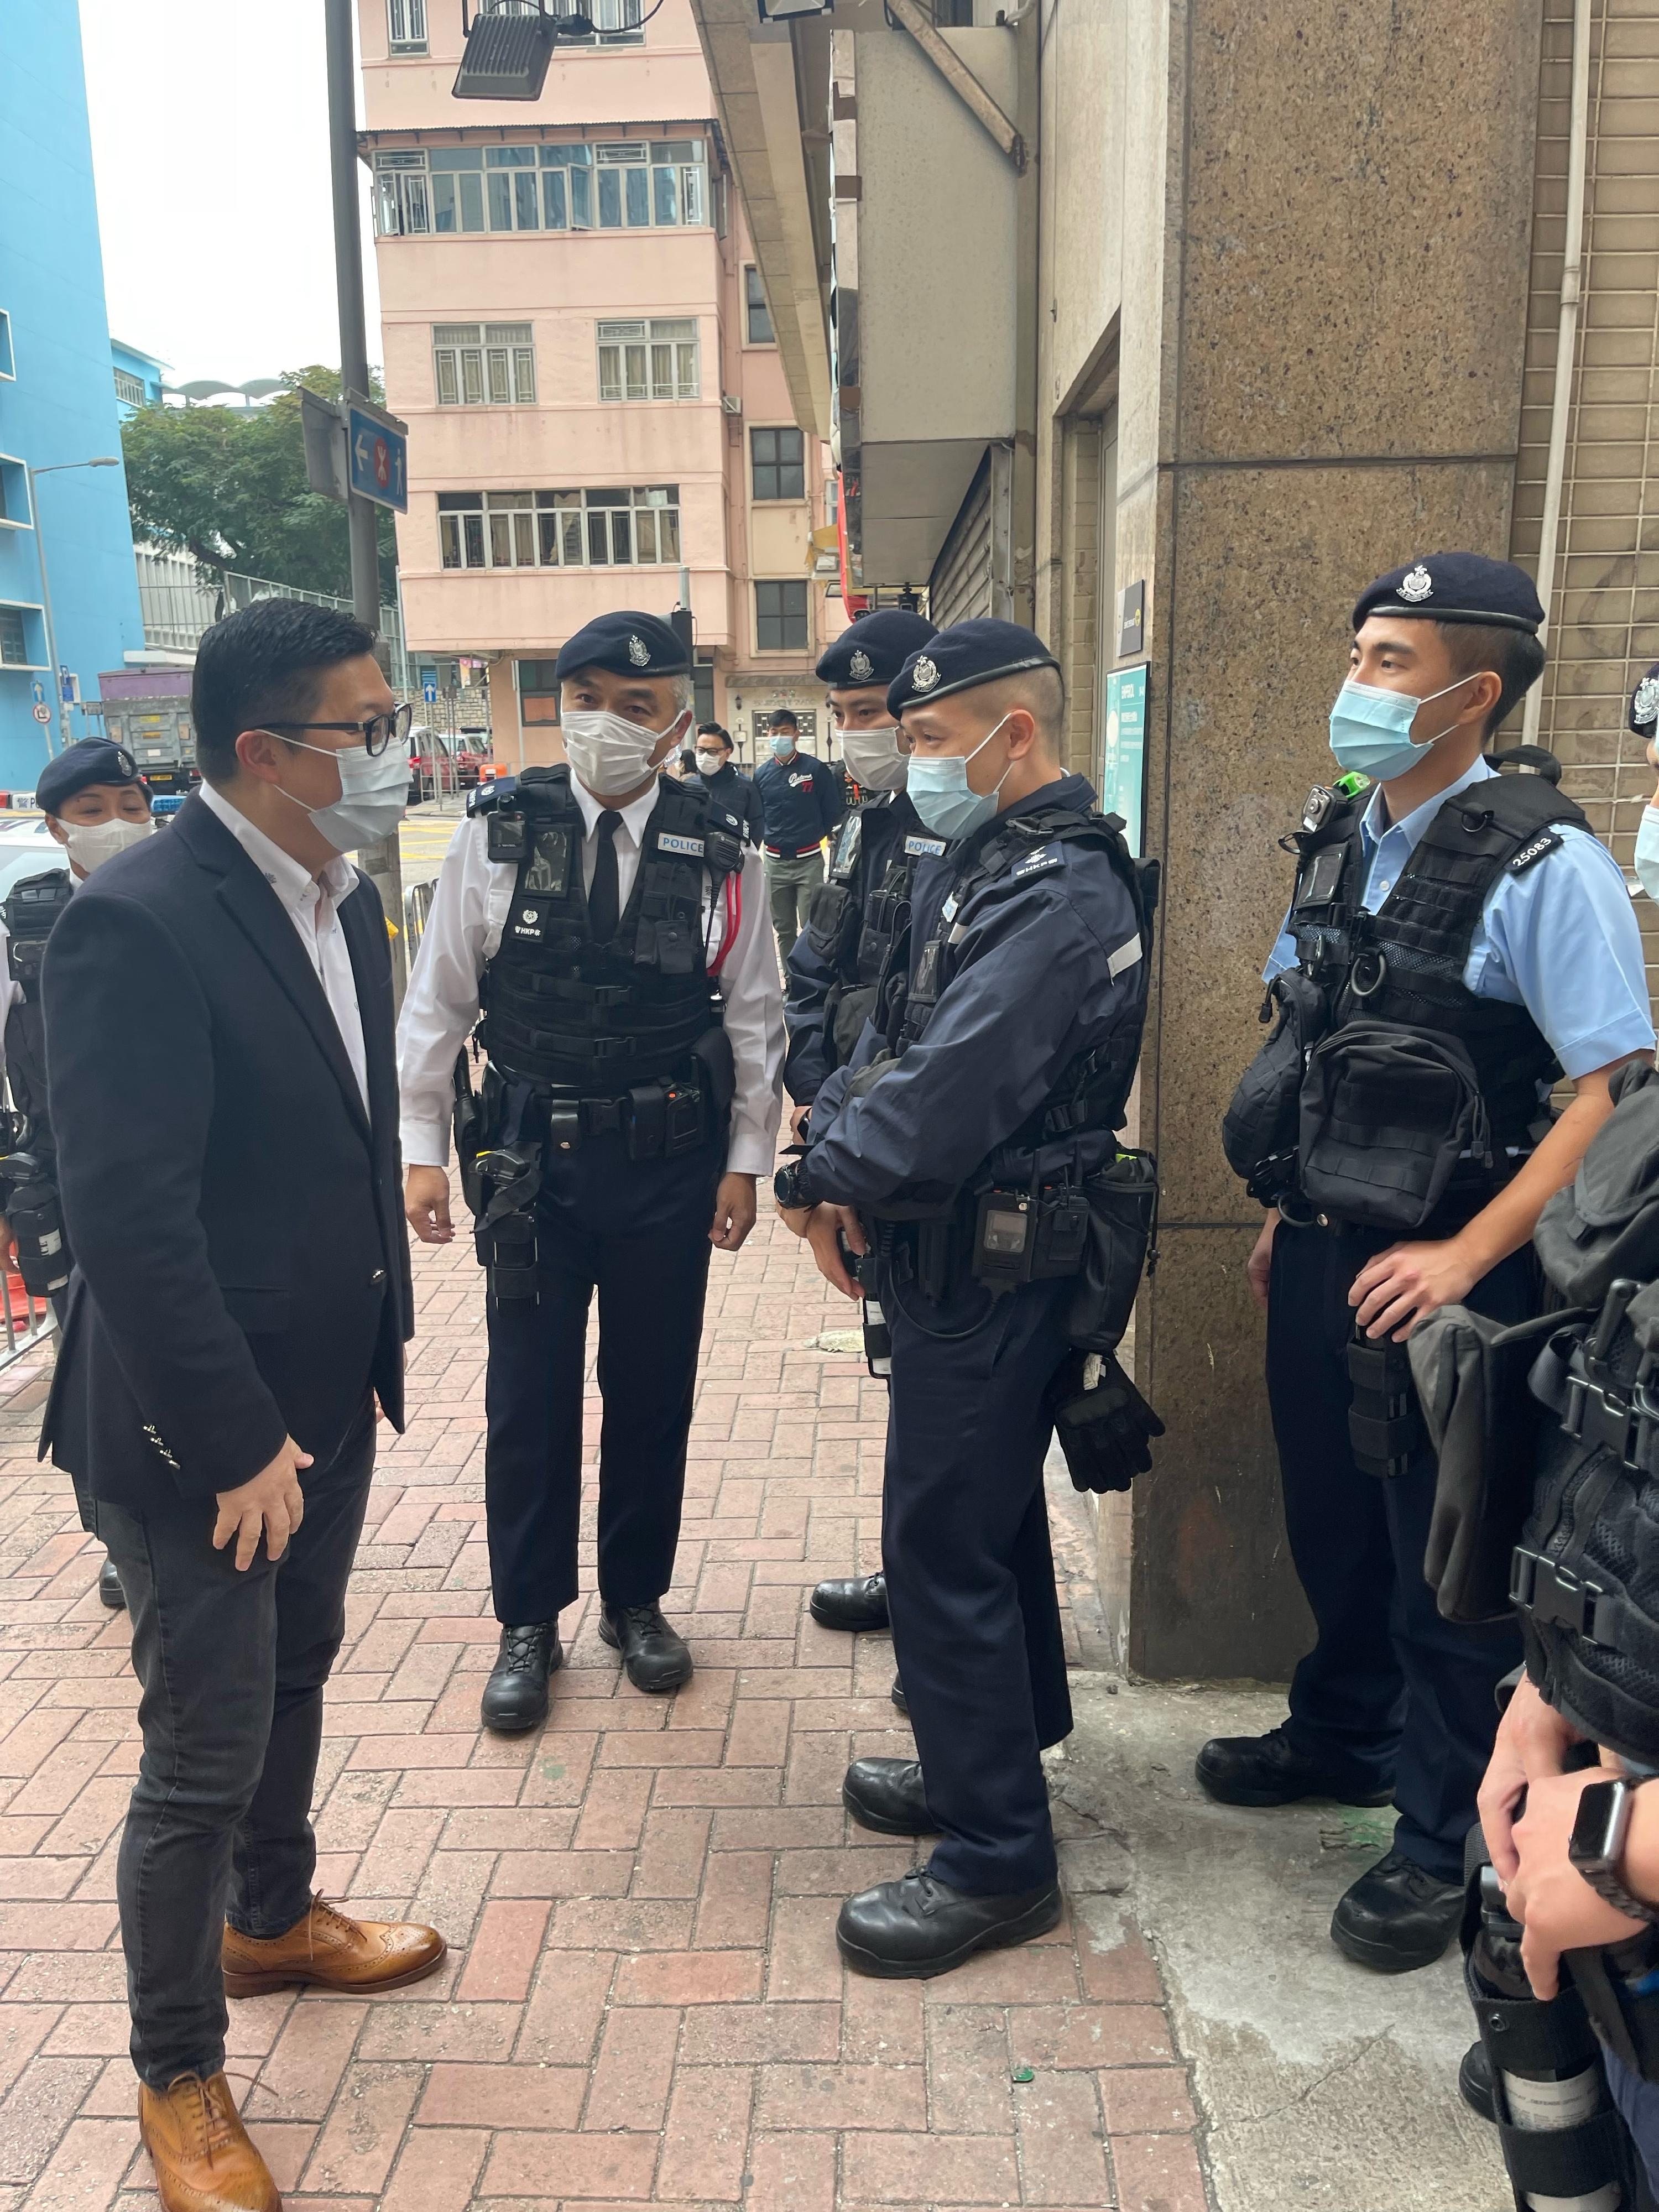 The 2021 Legislative Council General Election is held today (December 19). The Secretary for Security, Mr Tang Ping-keung, cast his vote at a polling station in To Kwa Wan this morning. Photo shows Mr Tang, after casting his vote, chatting with the Police officers there to learn more about the situation this morning.
